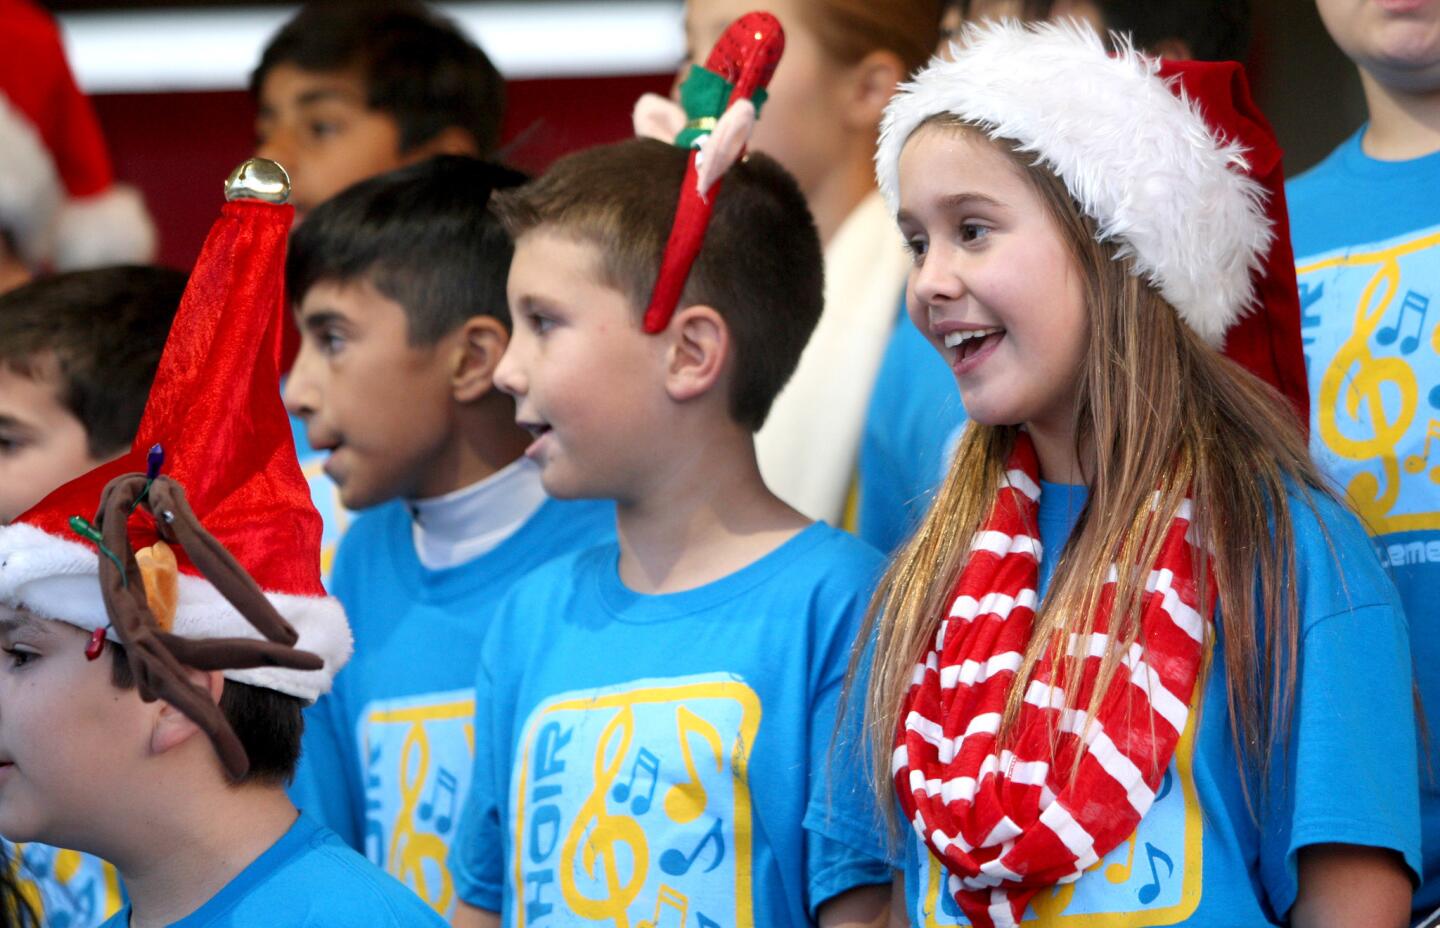 Arwyn Dilbeck and other members of the La Cañada Elementary School Lion's Pride Chorus sang holiday songs for the crowds gathered at the 21st Festival in Lights at Memorial Park in La Cañada Flintridge on Friday, Dec. 4, 2015.